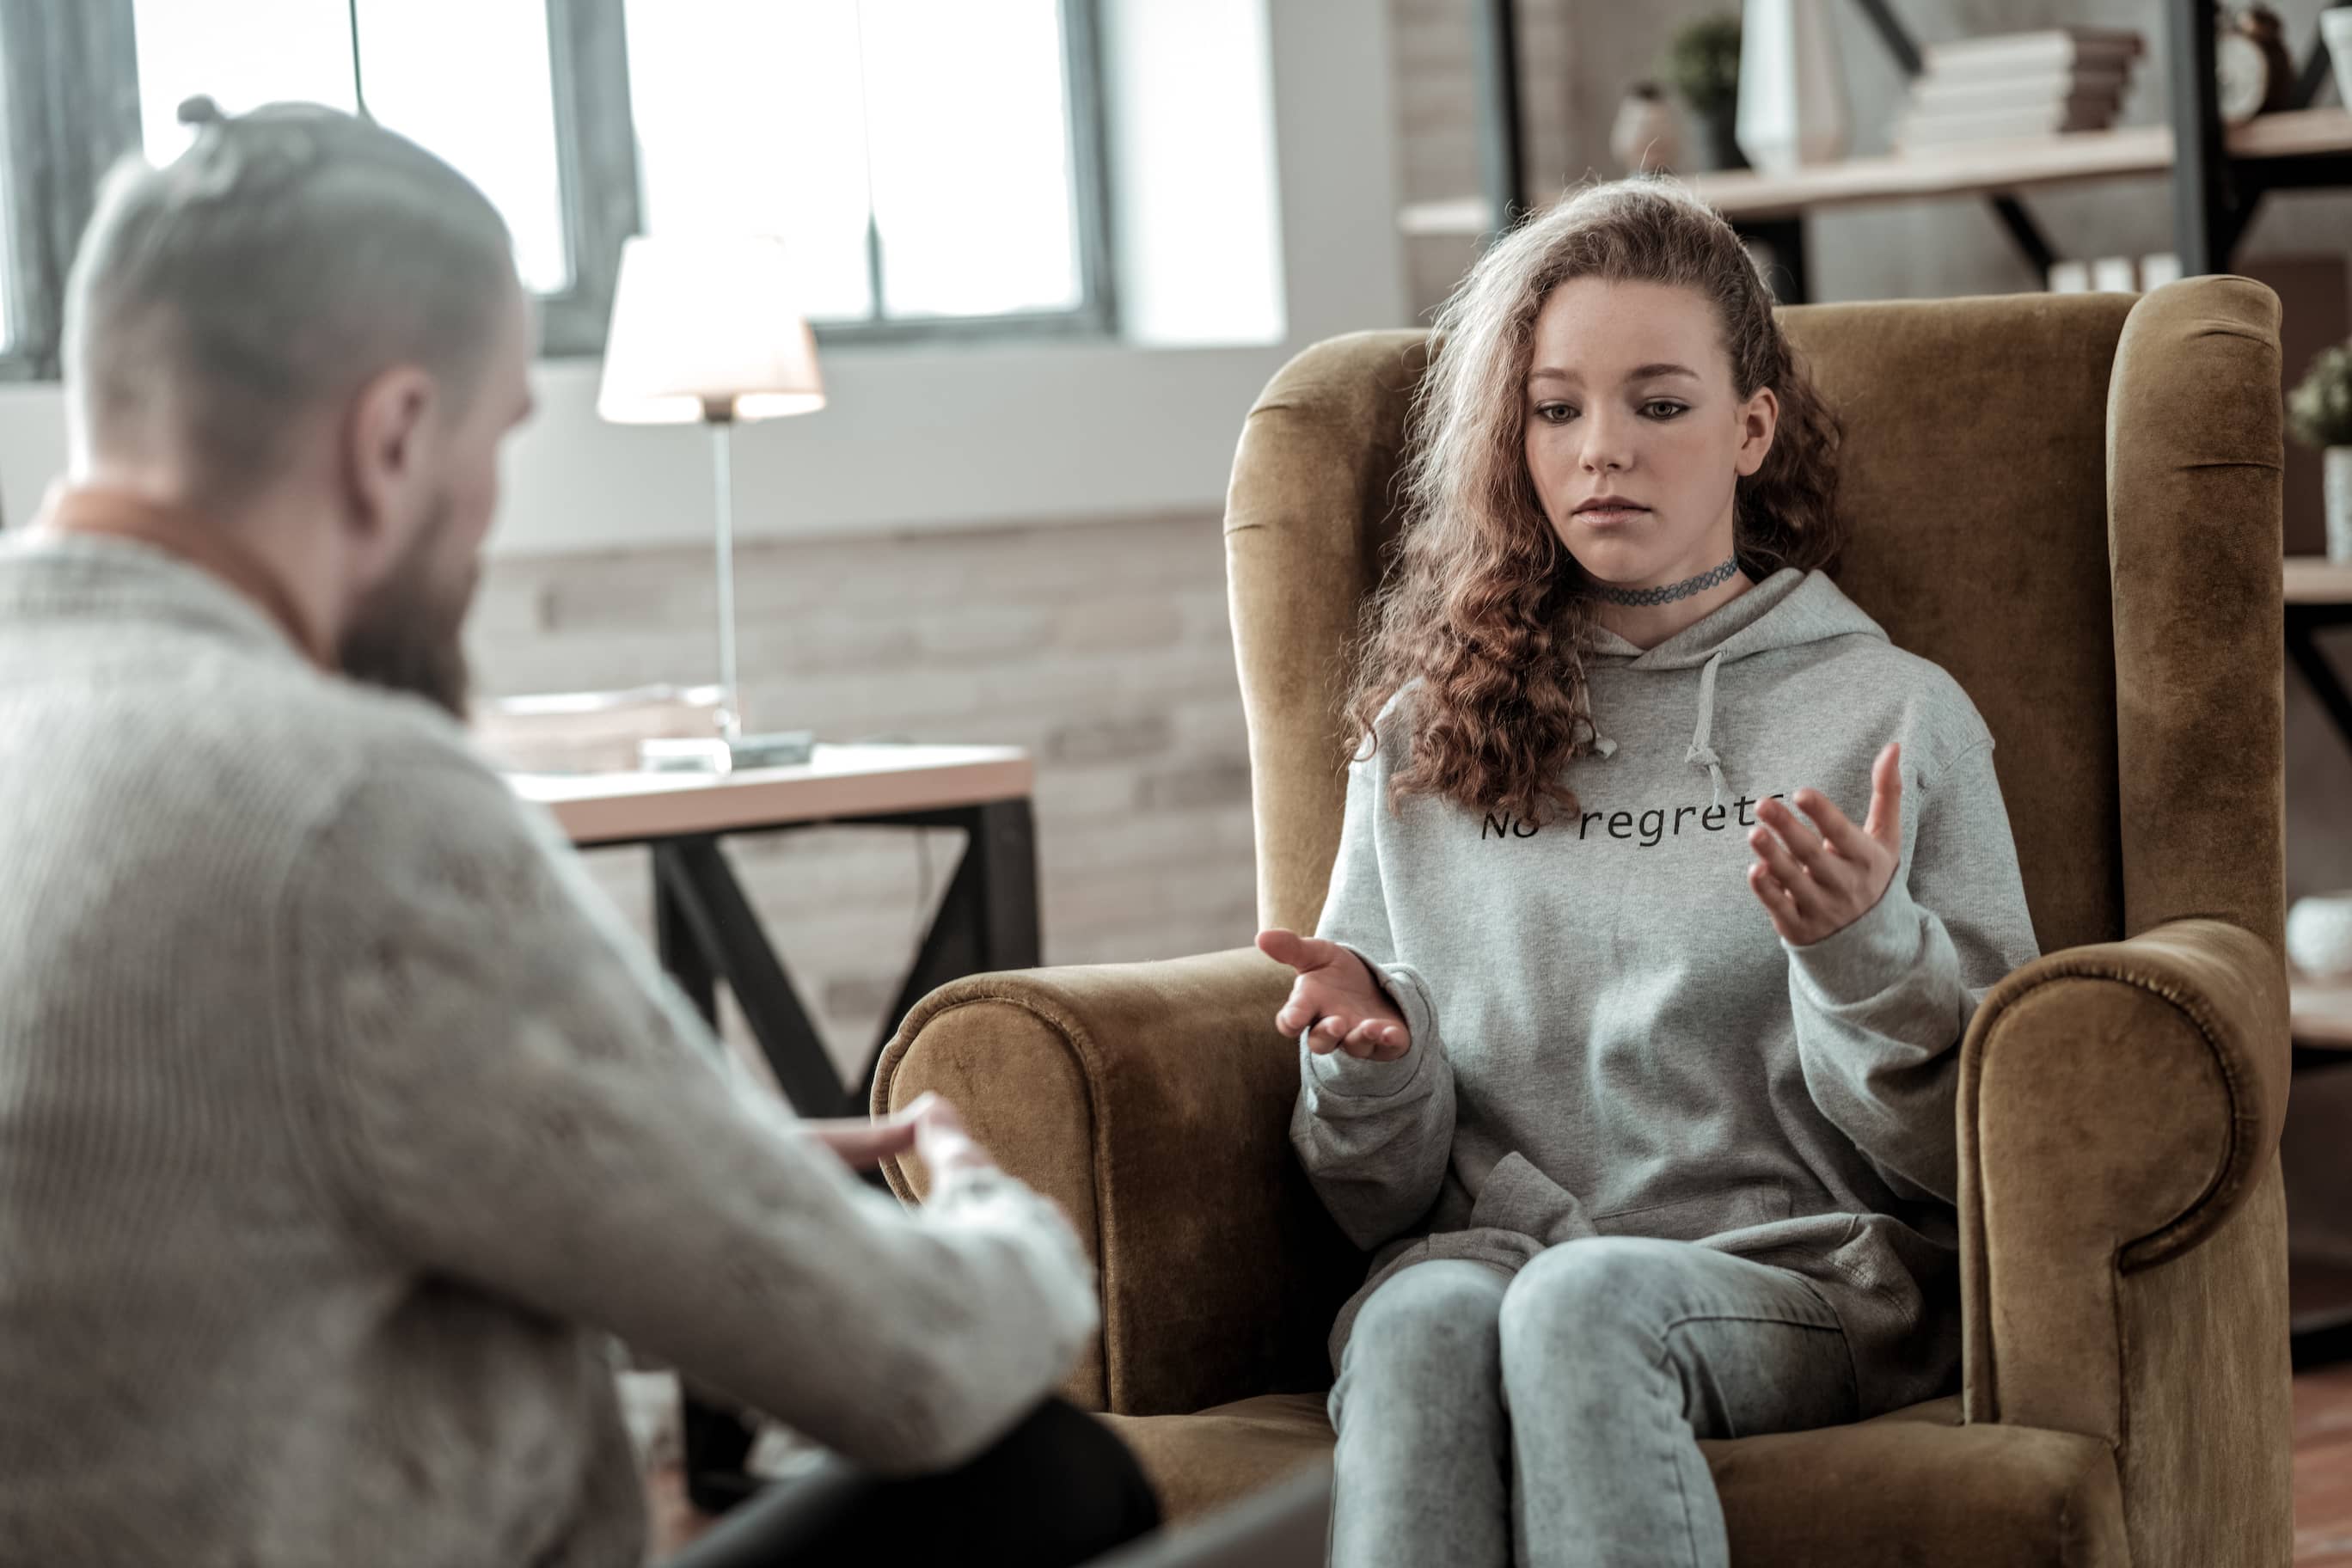 Teen girl earnestly expressing her perspective with her father during a heartfelt conversation in their living room.